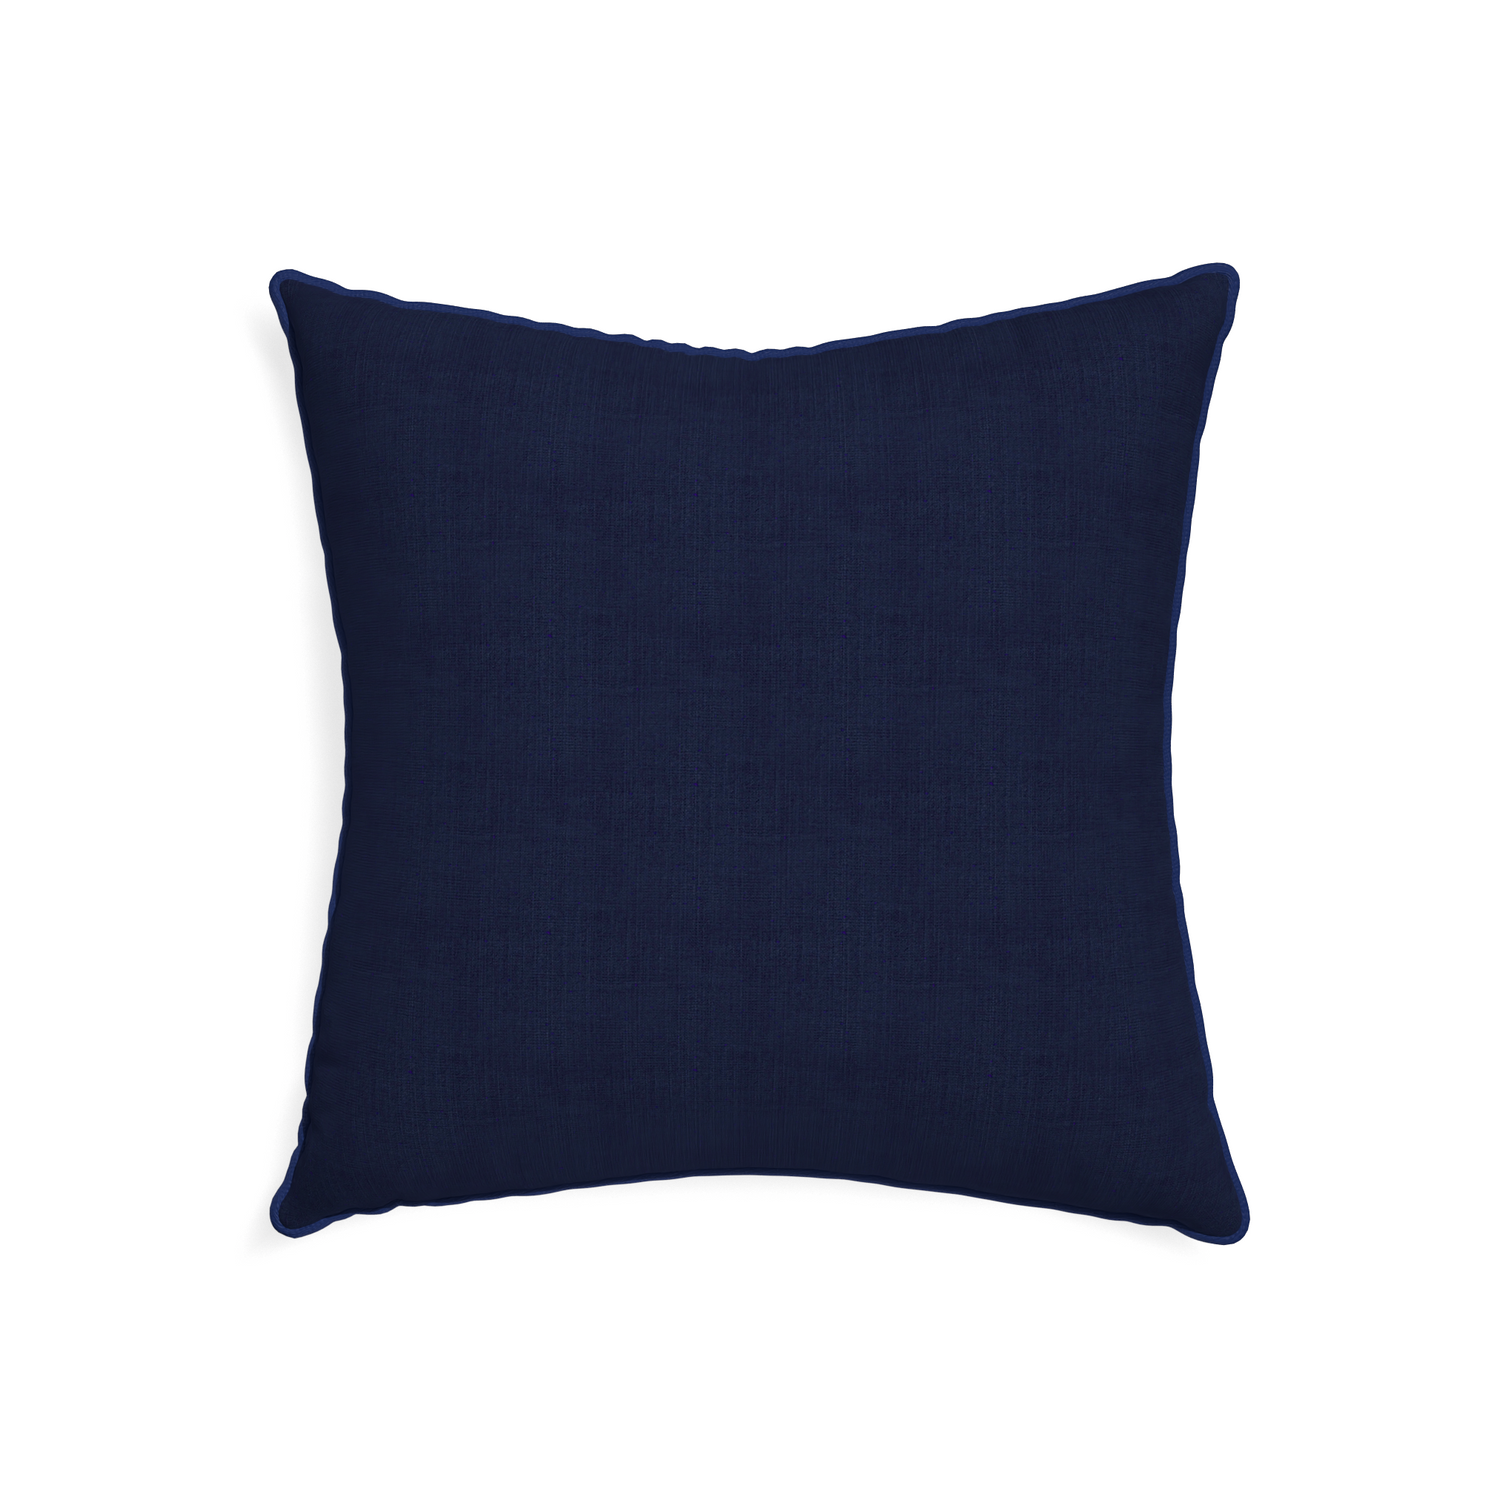 22-square midnight custom pillow with midnight piping on white background